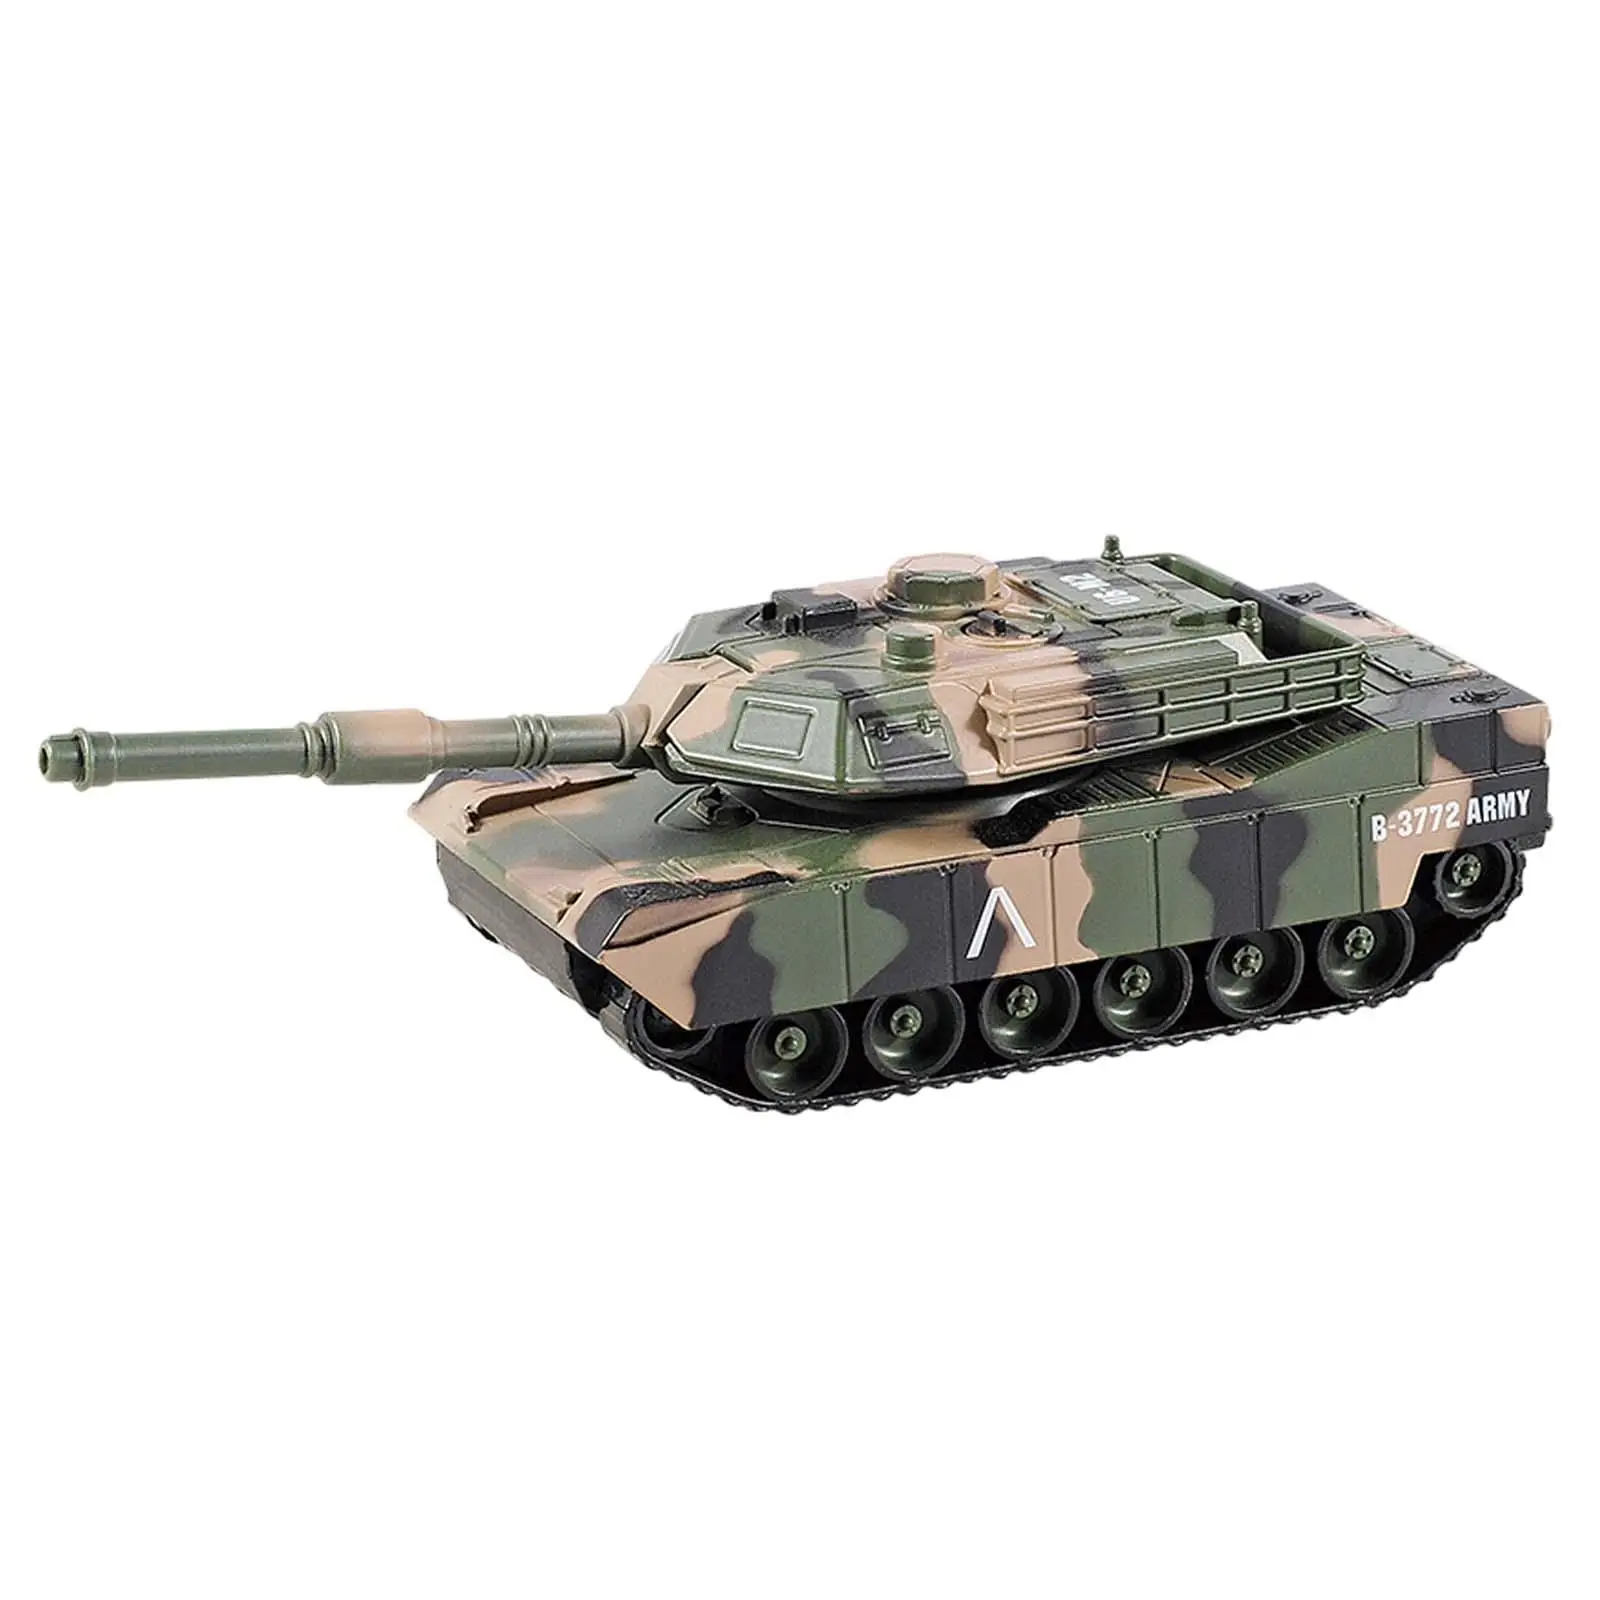 1/24 Scale Tank Toy Realistic Pullback Motion Rotating Fort Vehicle Pull Back Tank Toy for 3-7 Years Old Kids Boys Birthday Gift